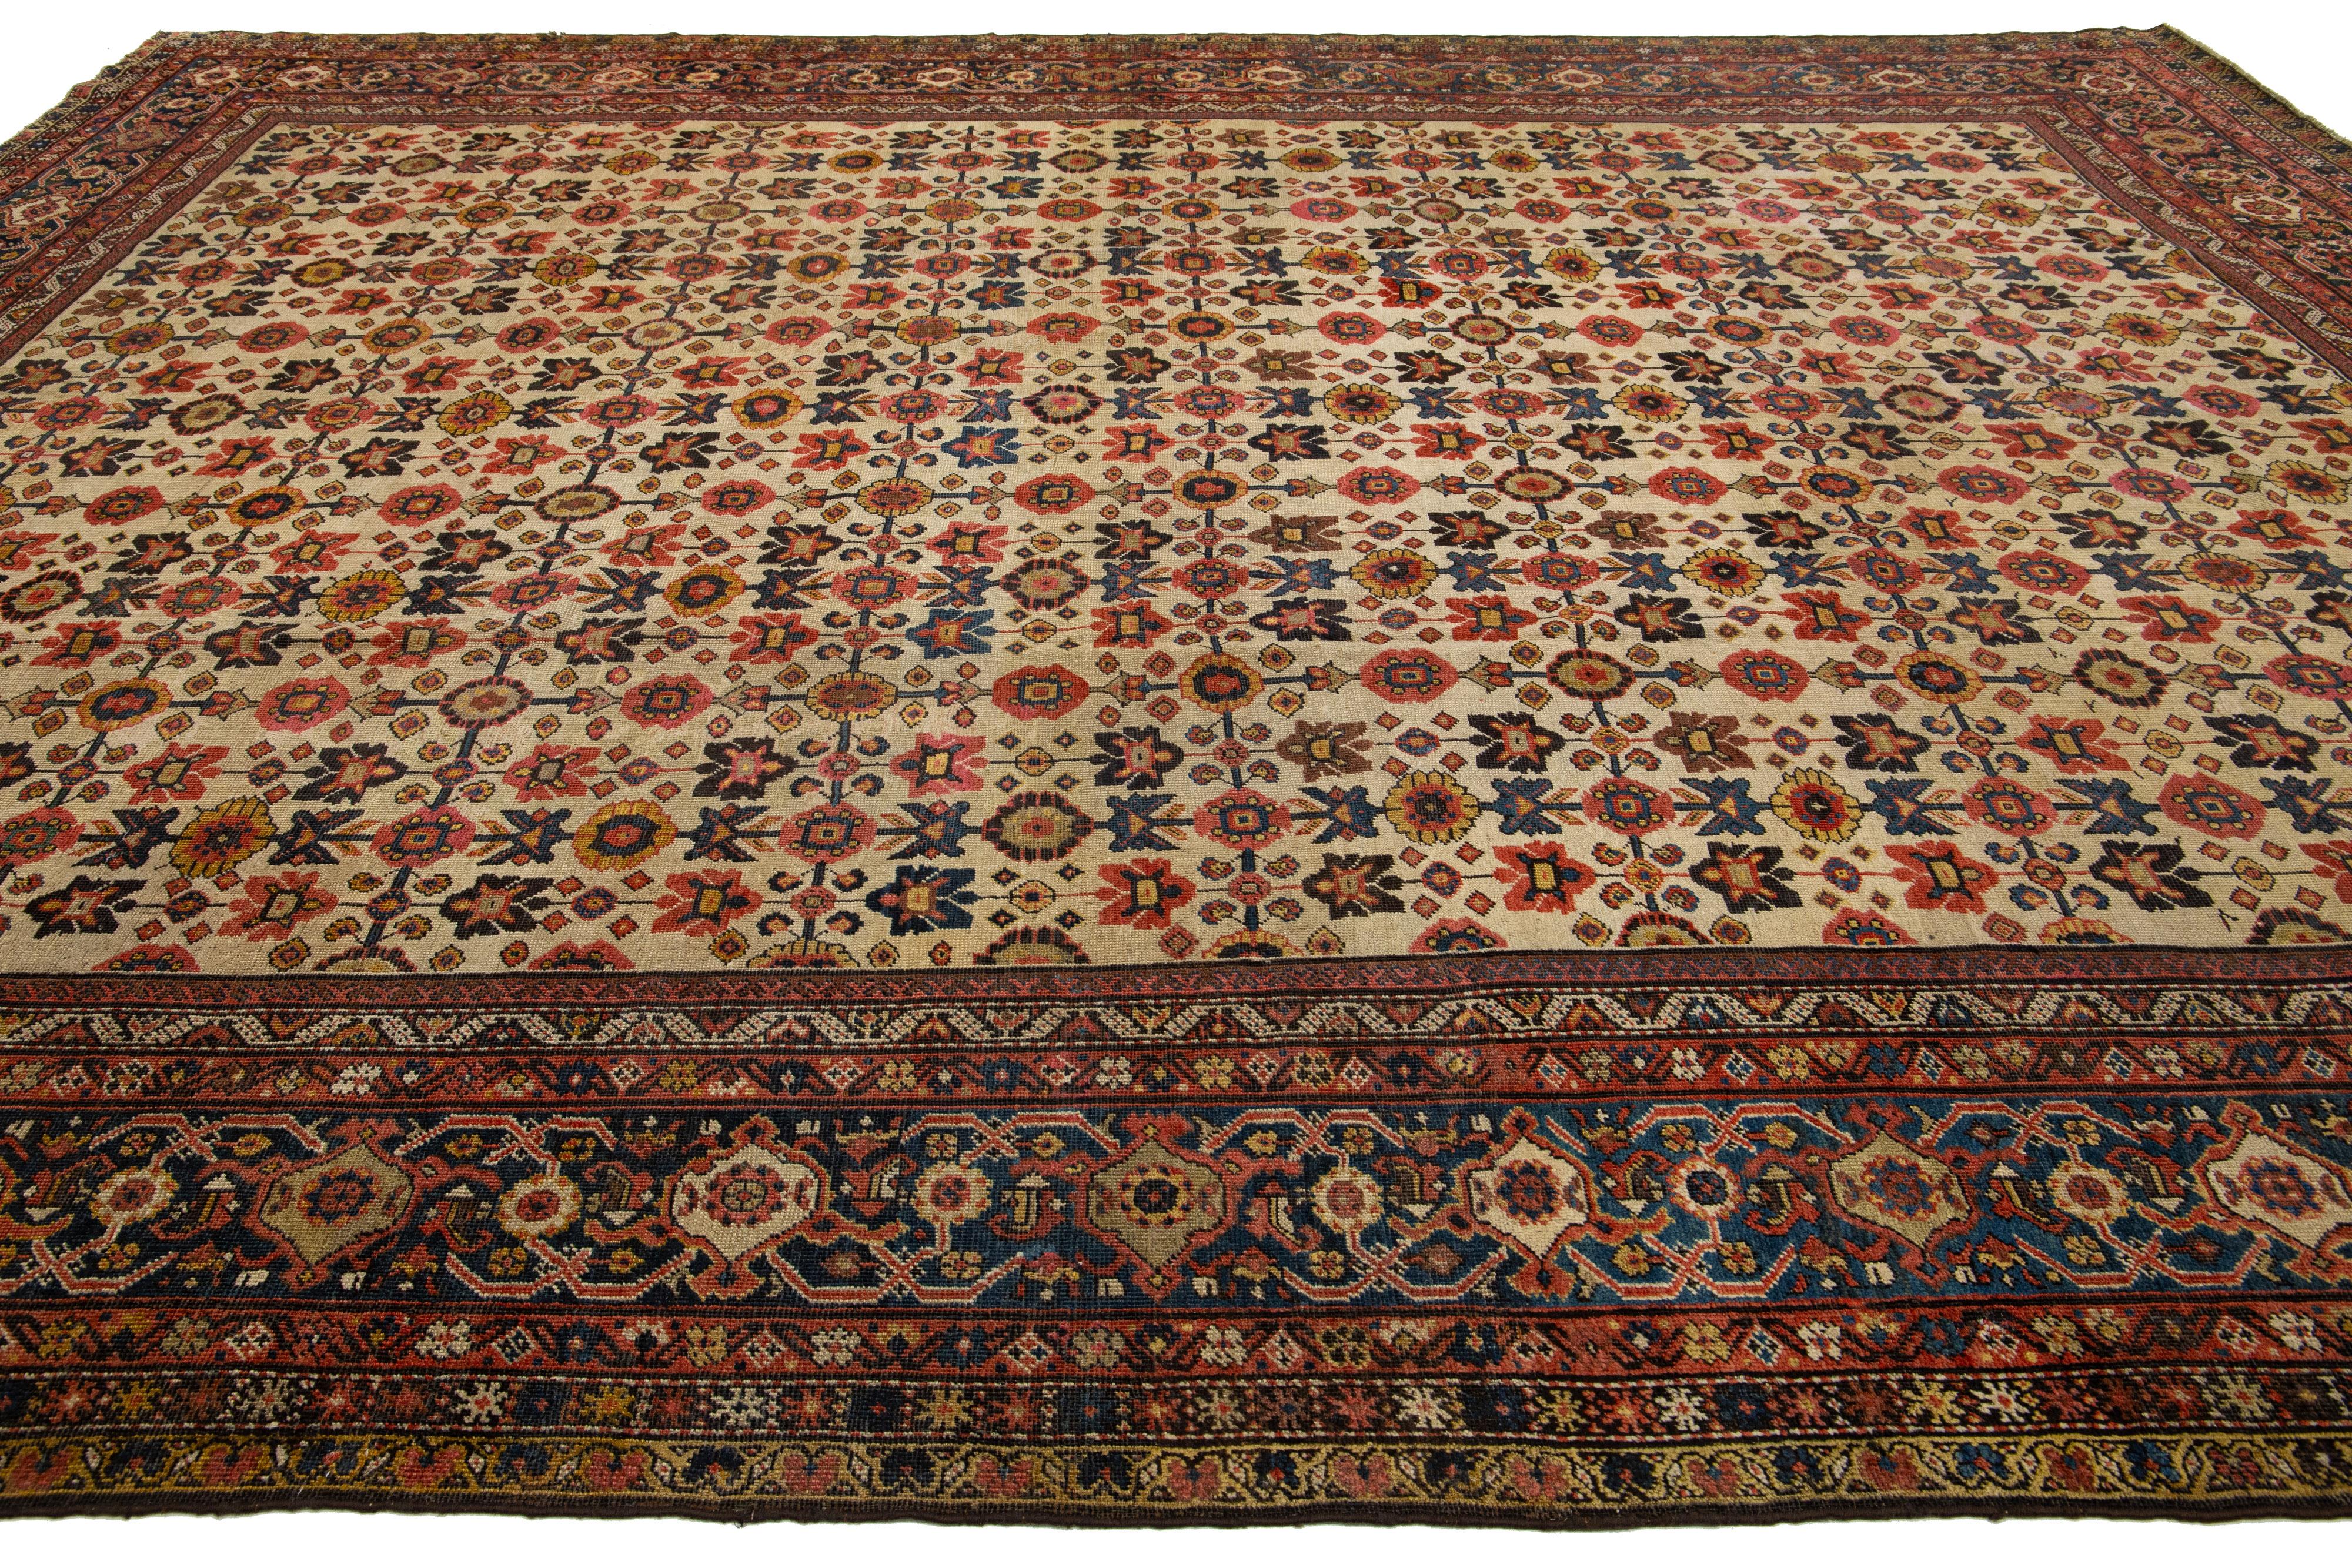 1880s Antique Persian Farahan Tan Wool Rug Handmade With Allover Floral Pattern In Excellent Condition For Sale In Norwalk, CT